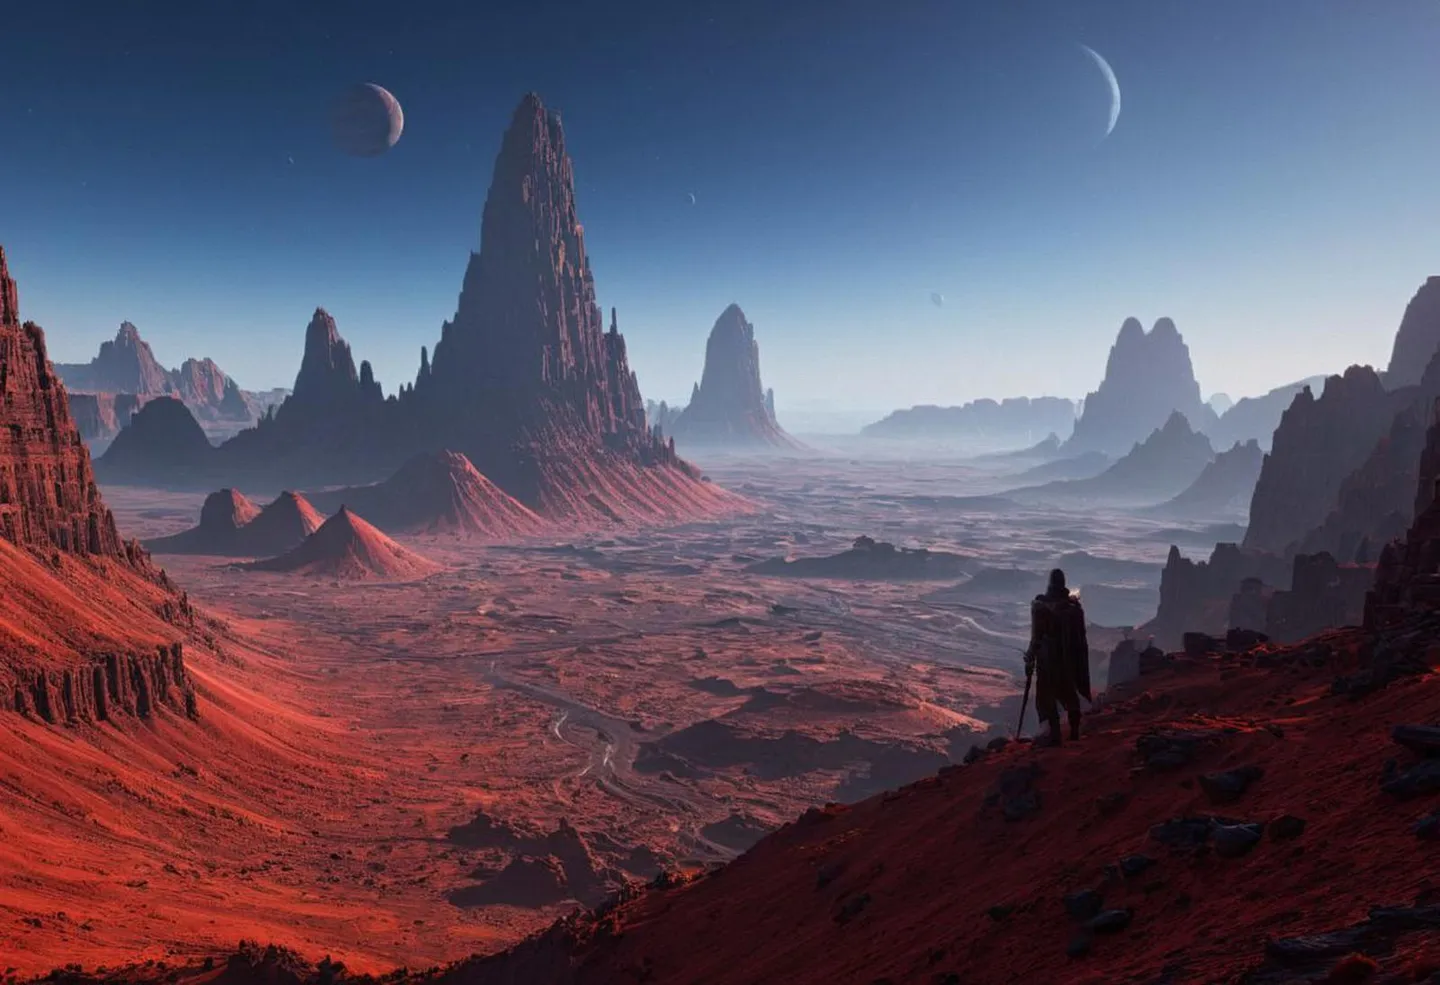 AI generated alien landscape with towering rock formations, a barren red terrain, and distant planets in the sky using Stable Diffusion.